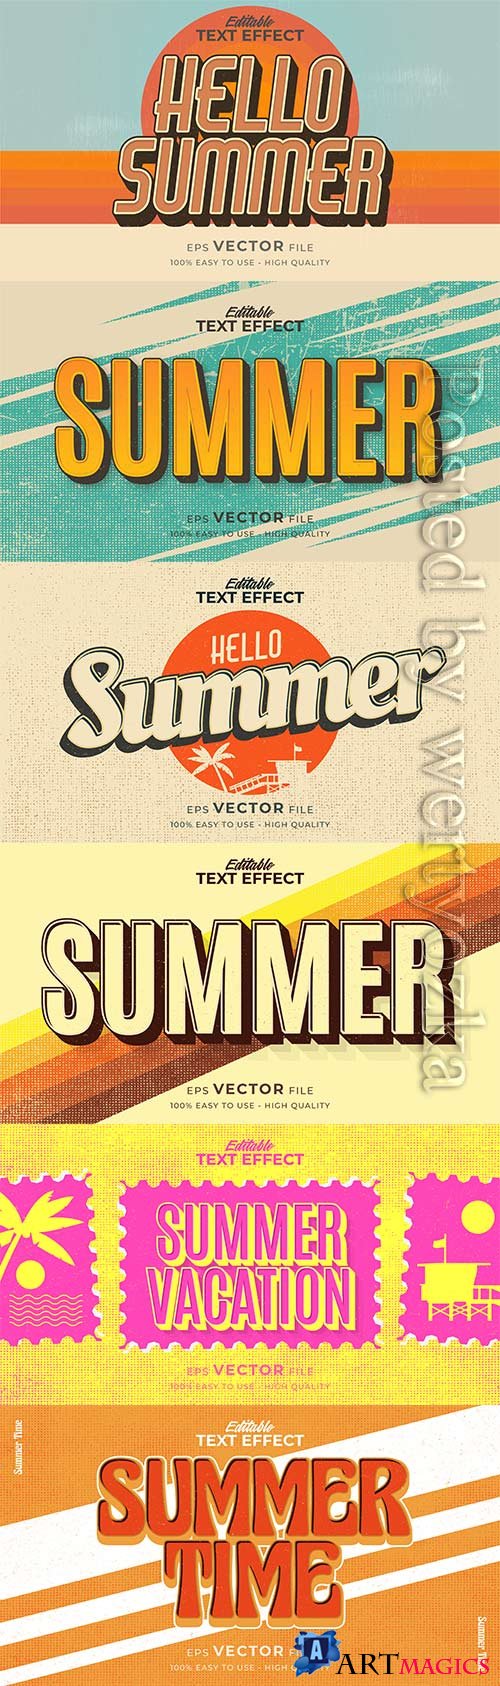 Retro summer holiday text in grunge style theme in vector